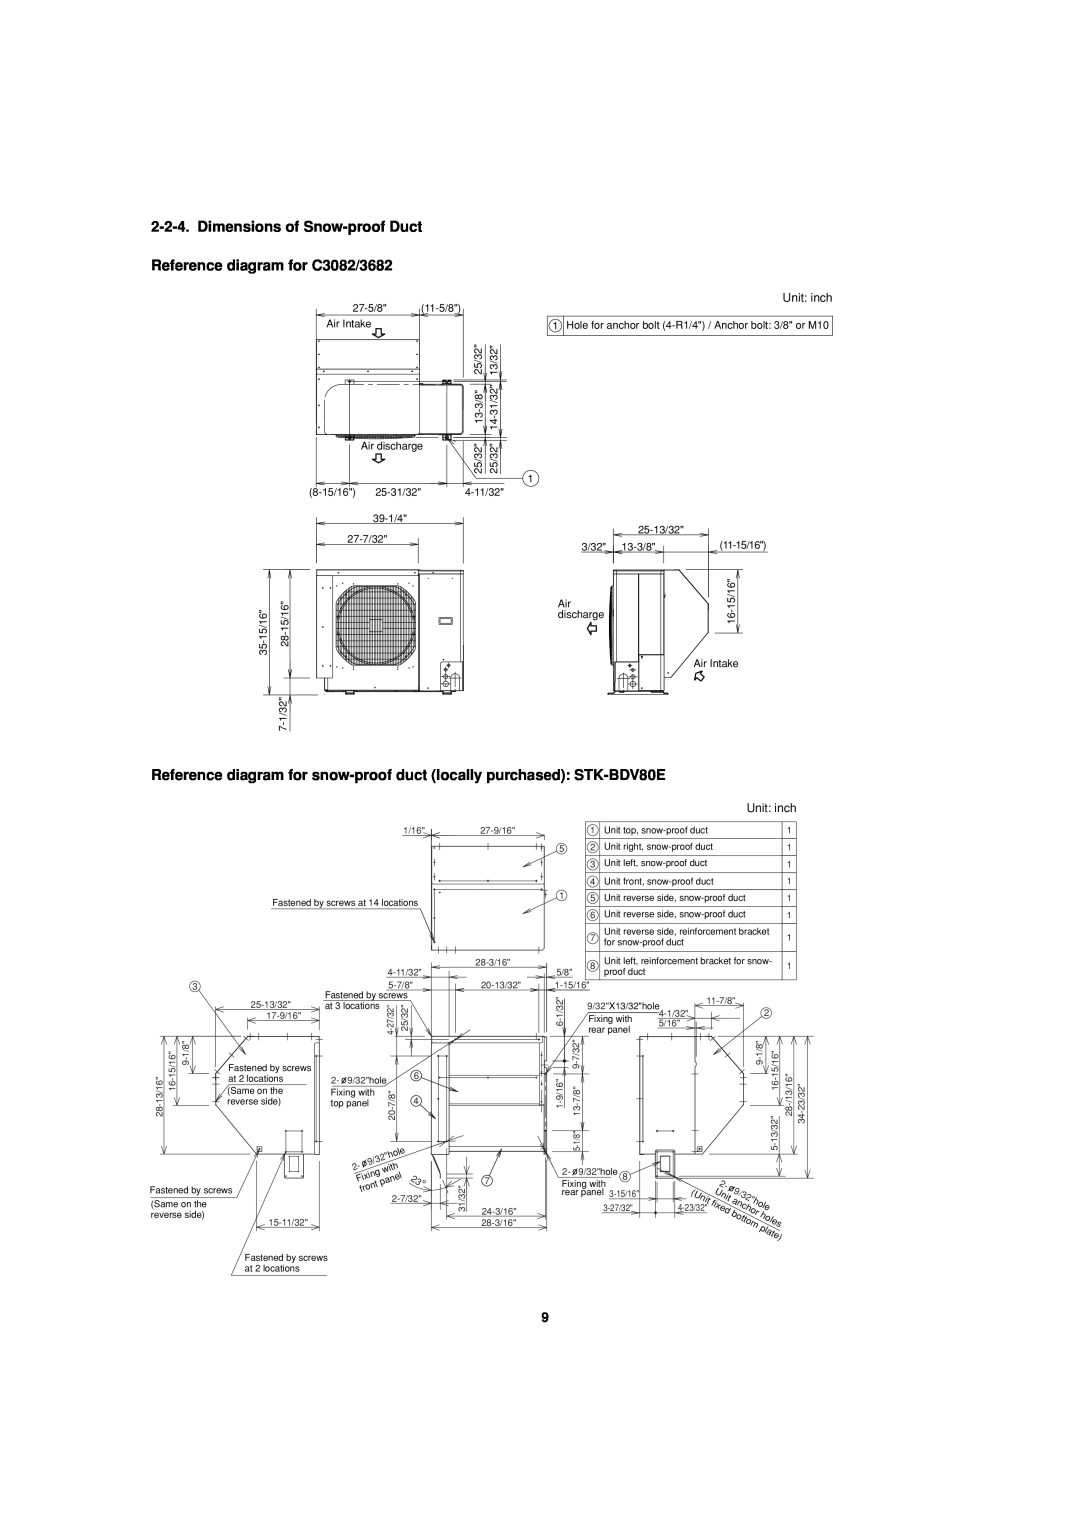 Sanyo C3682 service manual Dimensions of Snow-proof Duct Reference diagram for C3082/3682, 27/32-4 25/32 